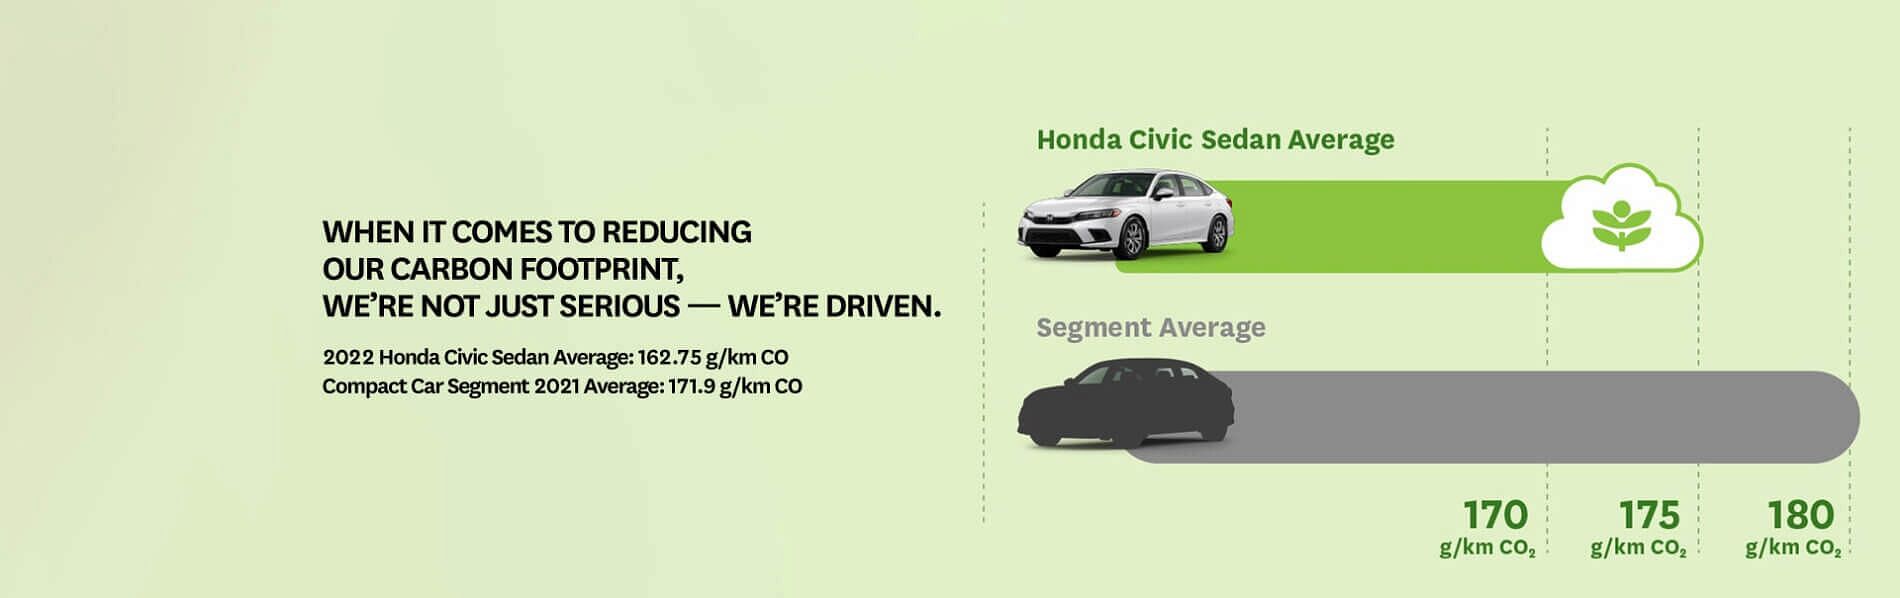 When it comes to reducing our carbon footprint, we’re not just serious — we’re driven. 2022 Honda Civic Sedan Average: 162.75 g/km CO. Compact Car Segment 2021 Average: 171.9 g/km CO